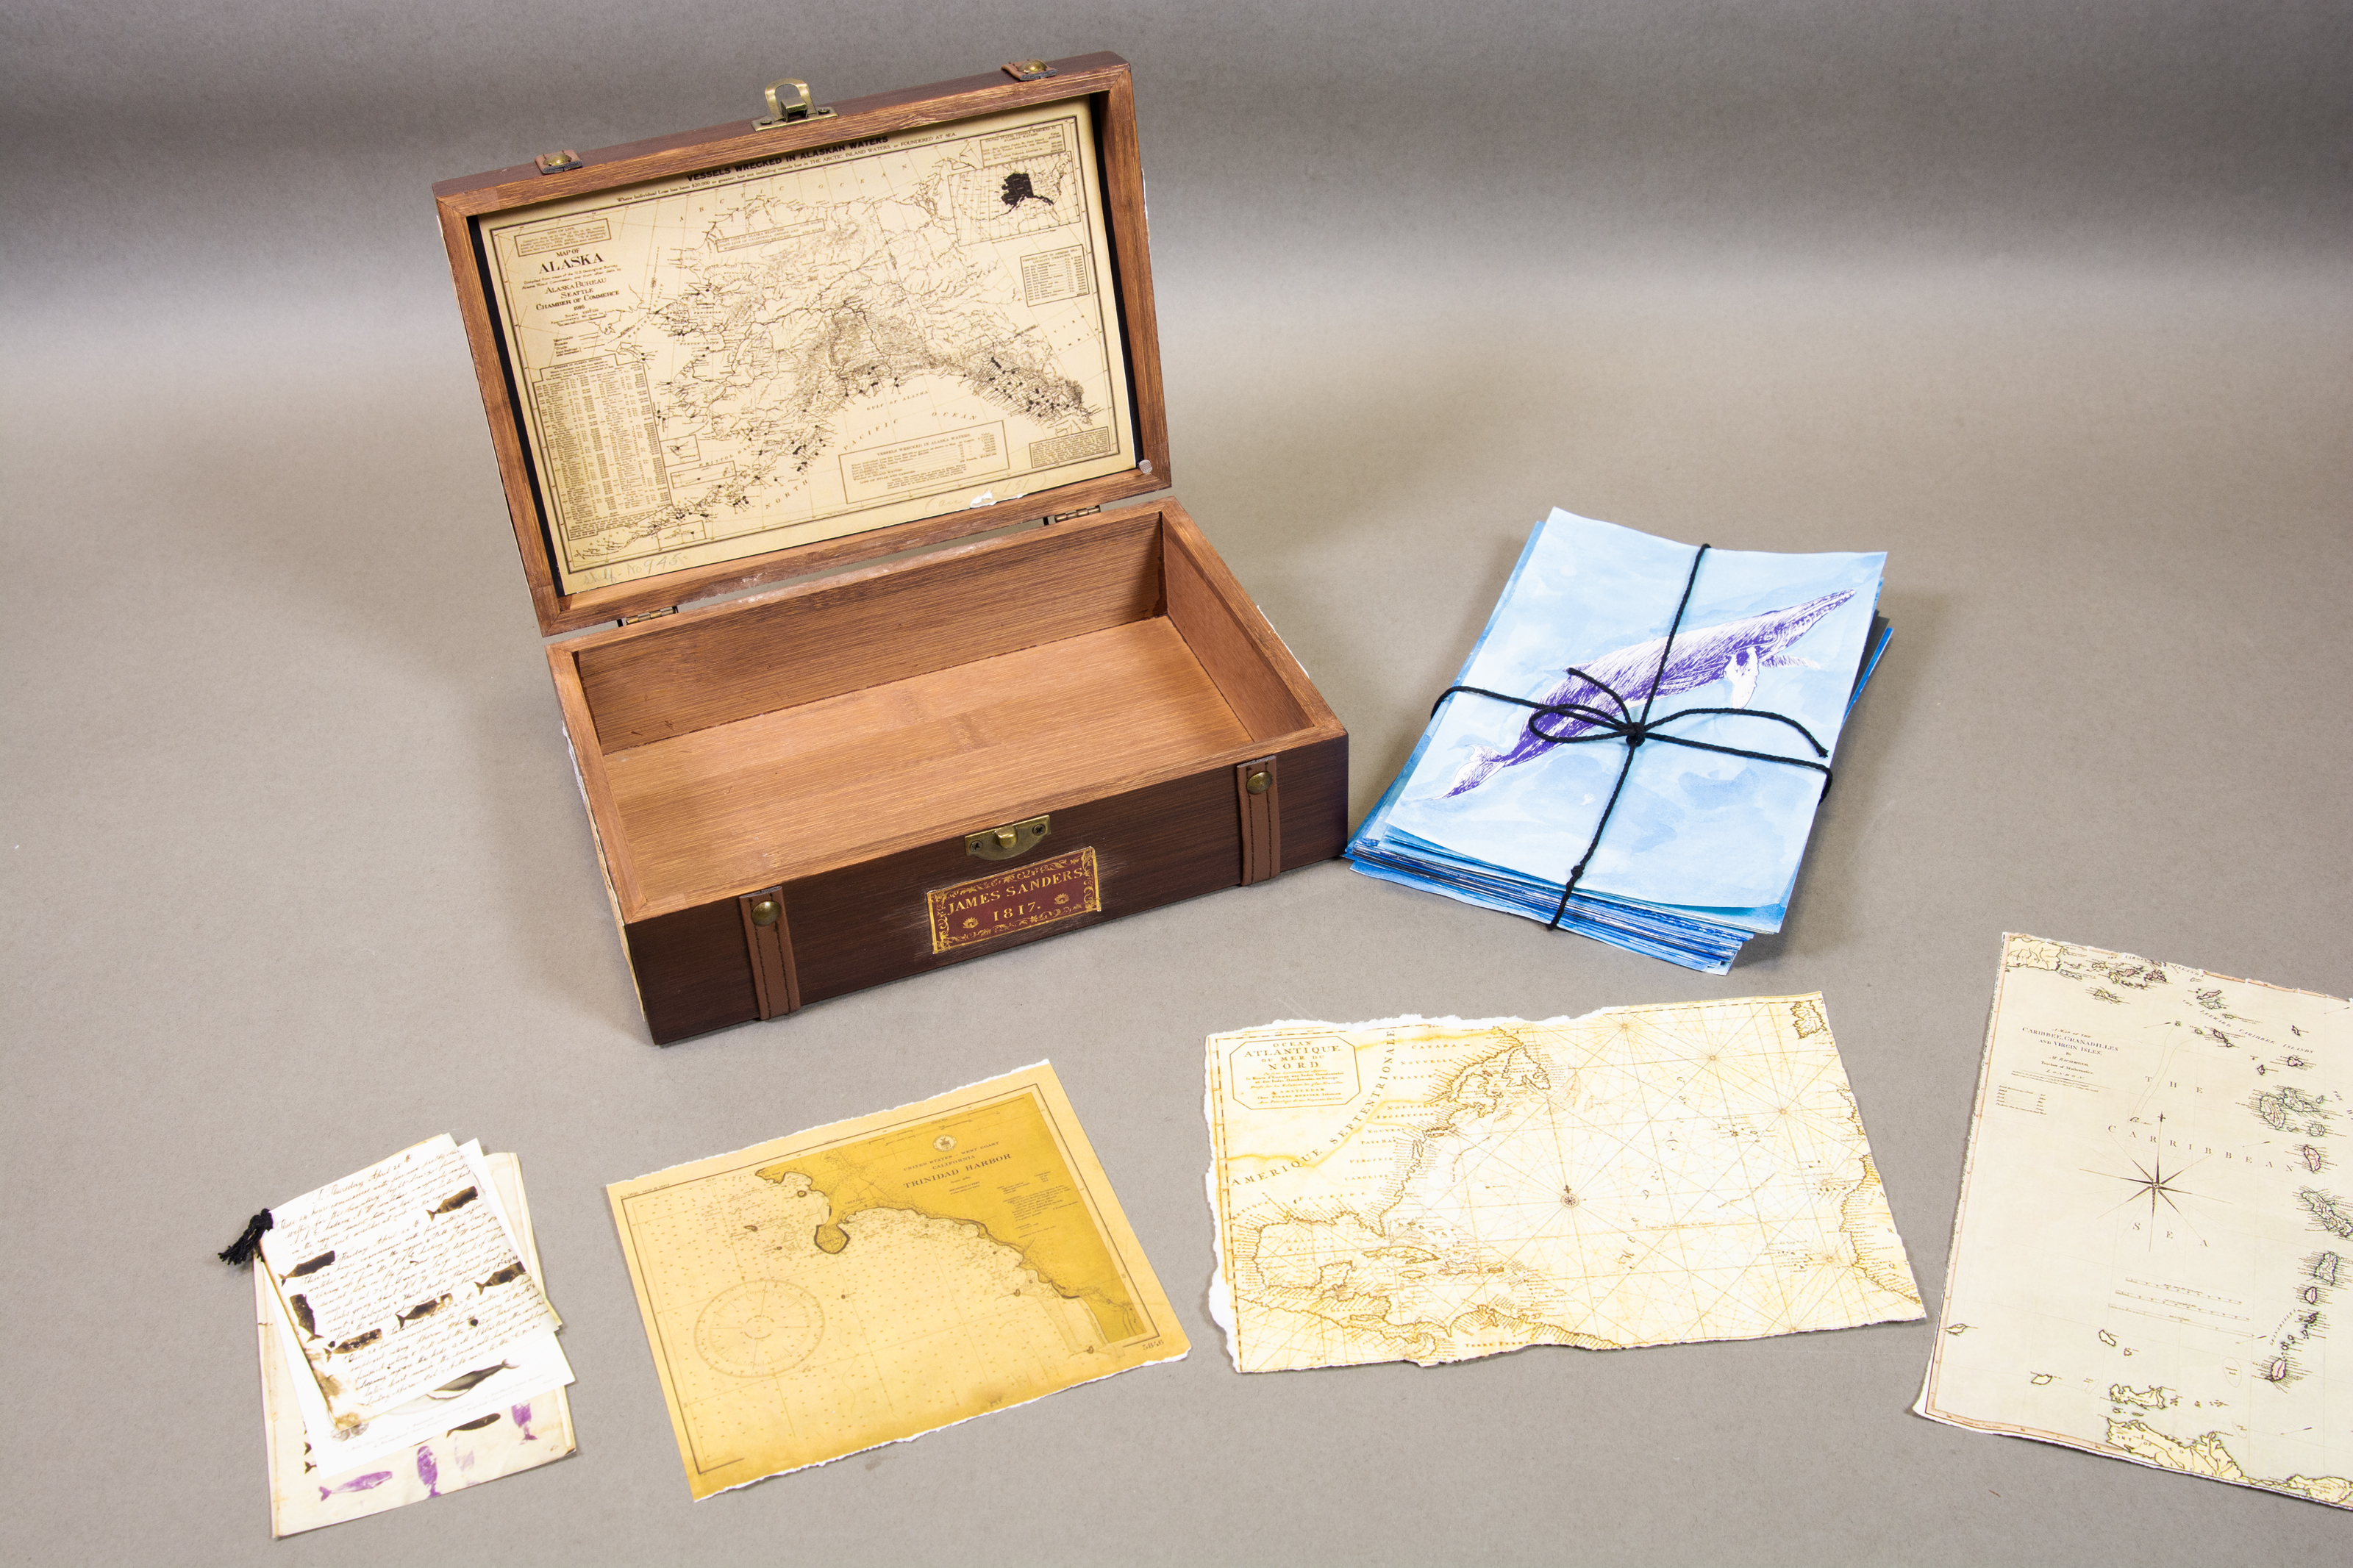 A wooden box made by Danielle Kim open with hand drawn maps and a series of watercolor illustrations of whale migration patters scattered around it